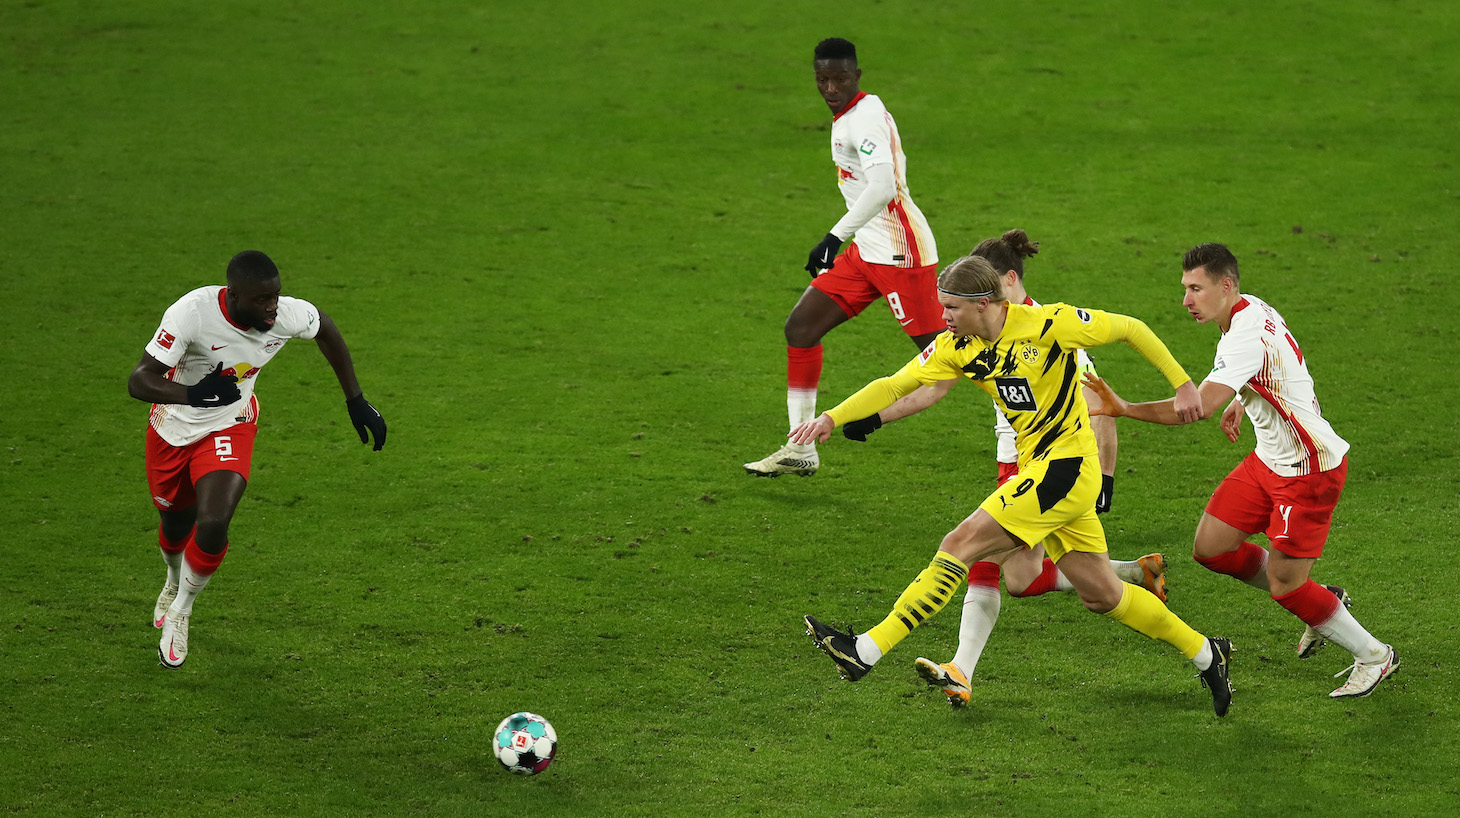 Erling Haaland of Borussia Dortmund battles for possession with Dayot Upamecano, Amadou Haidara, Marcel Sabitzer and Willi Orban of RB Leipzig during the Bundesliga match between RB Leipzig and Borussia Dortmund at Red Bull Arena on January 09, 2021 in Leipzig, Germany. Sporting stadiums around Germany remain under strict restrictions due to the Coronavirus Pandemic as Government social distancing laws prohibit fans inside venues resulting in games being played behind closed doors.